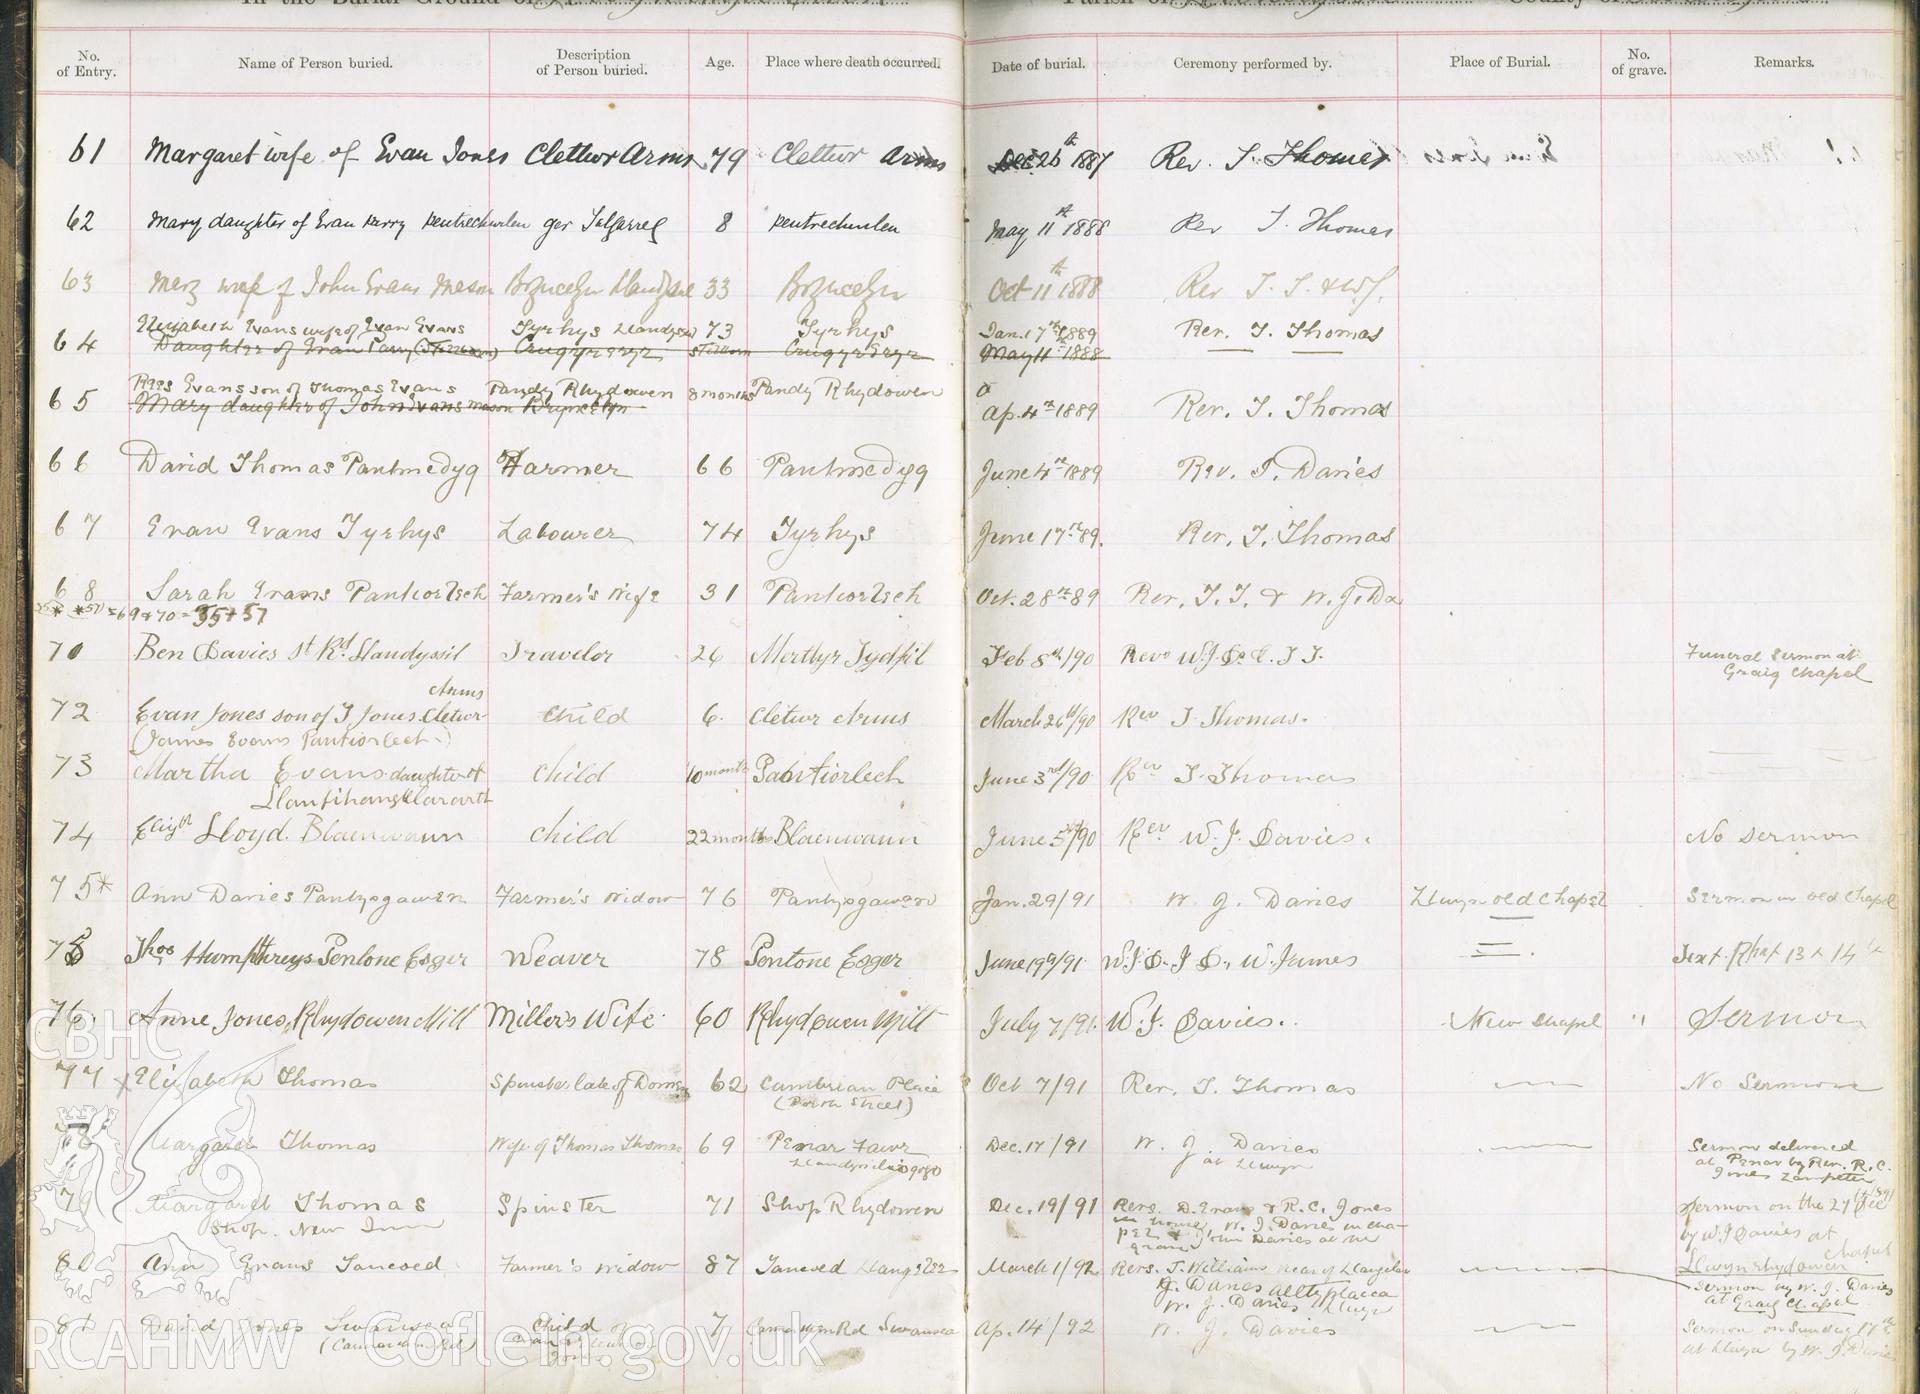 Scanned copy of handwritten burial register at Llwydrhydowen New Chapel and old chapel from 26th December 1887 to 14th April 1892. Donated to the RCAHMW as part of the Digital Dissent Project.